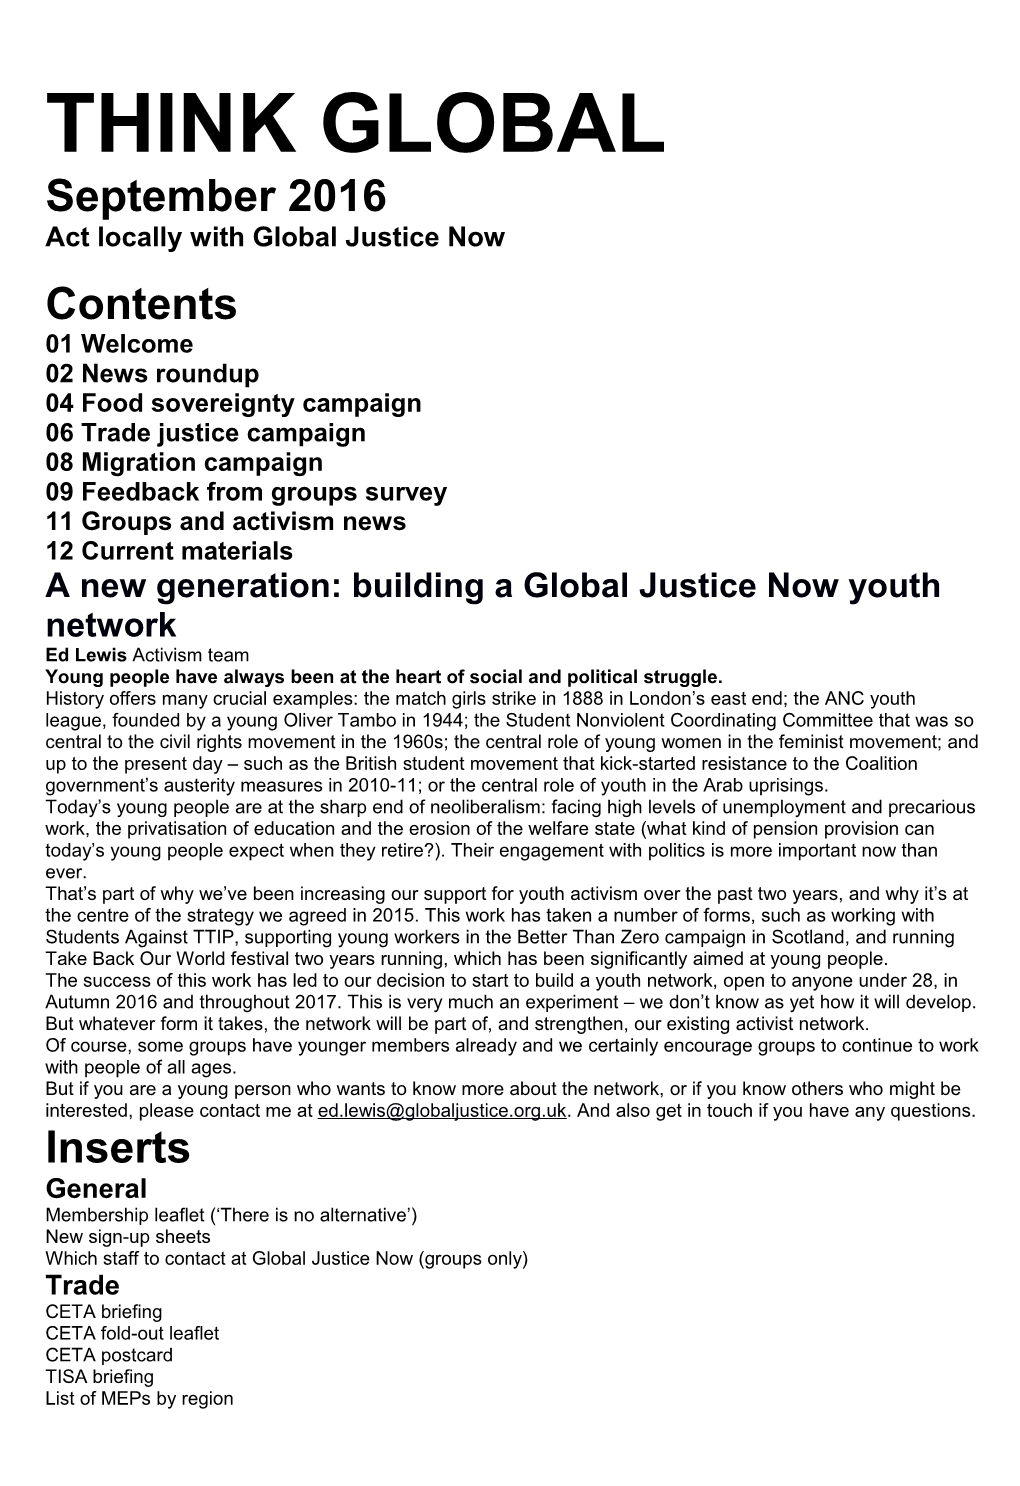 Act Locally with Global Justice Now s1